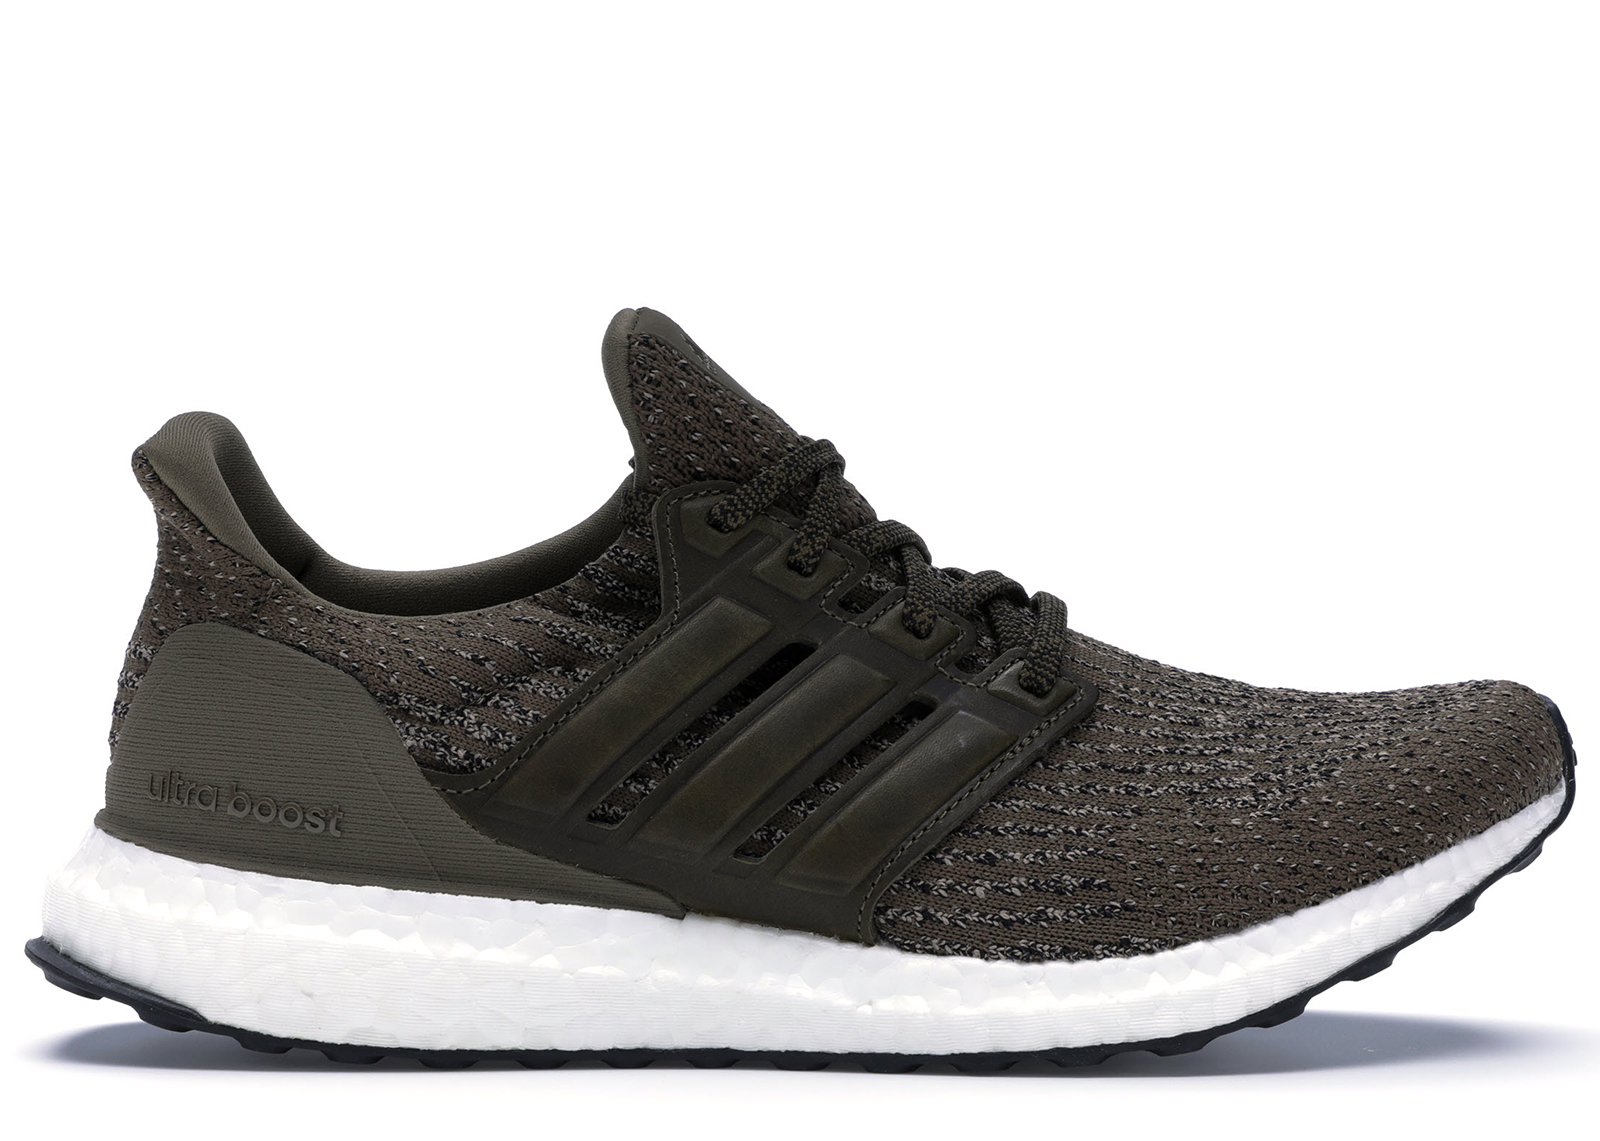 adidas Ultra Boost 3.0 Trace Olive - S82018